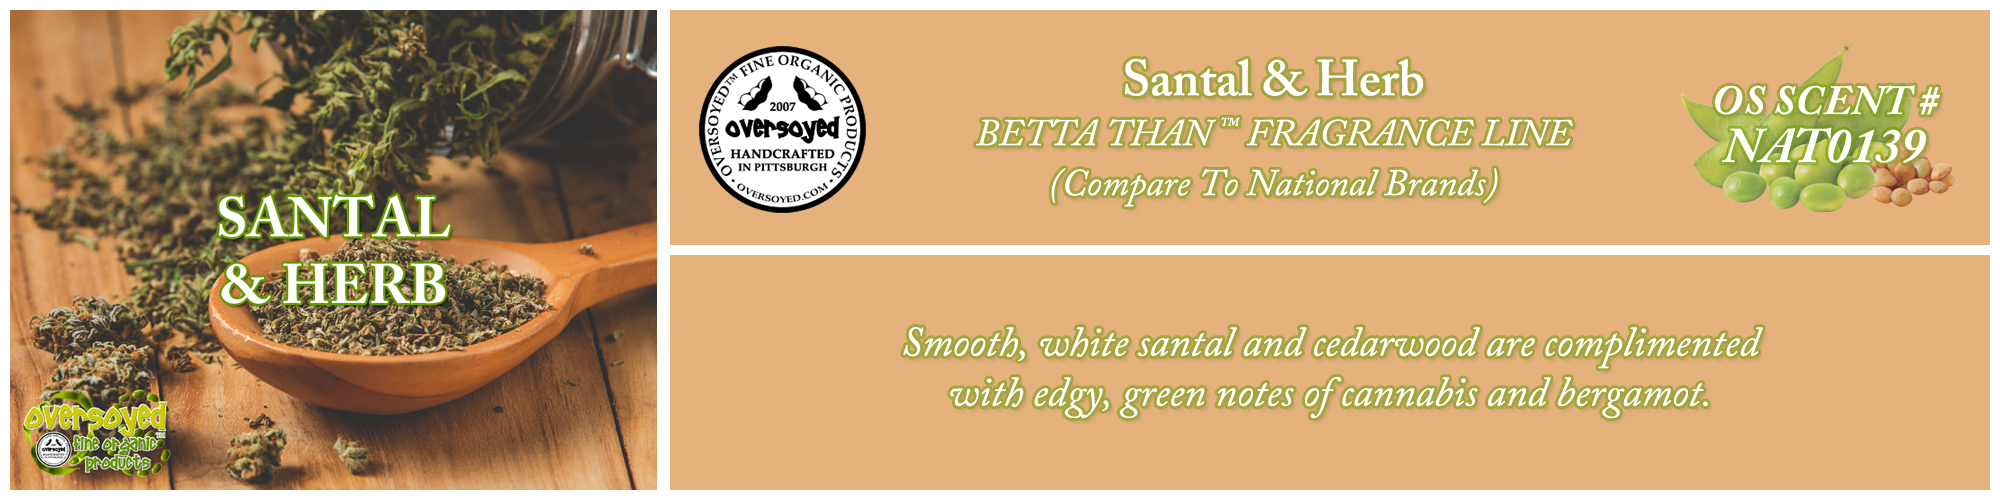 Santal & Herb Handcrafted Products Collection